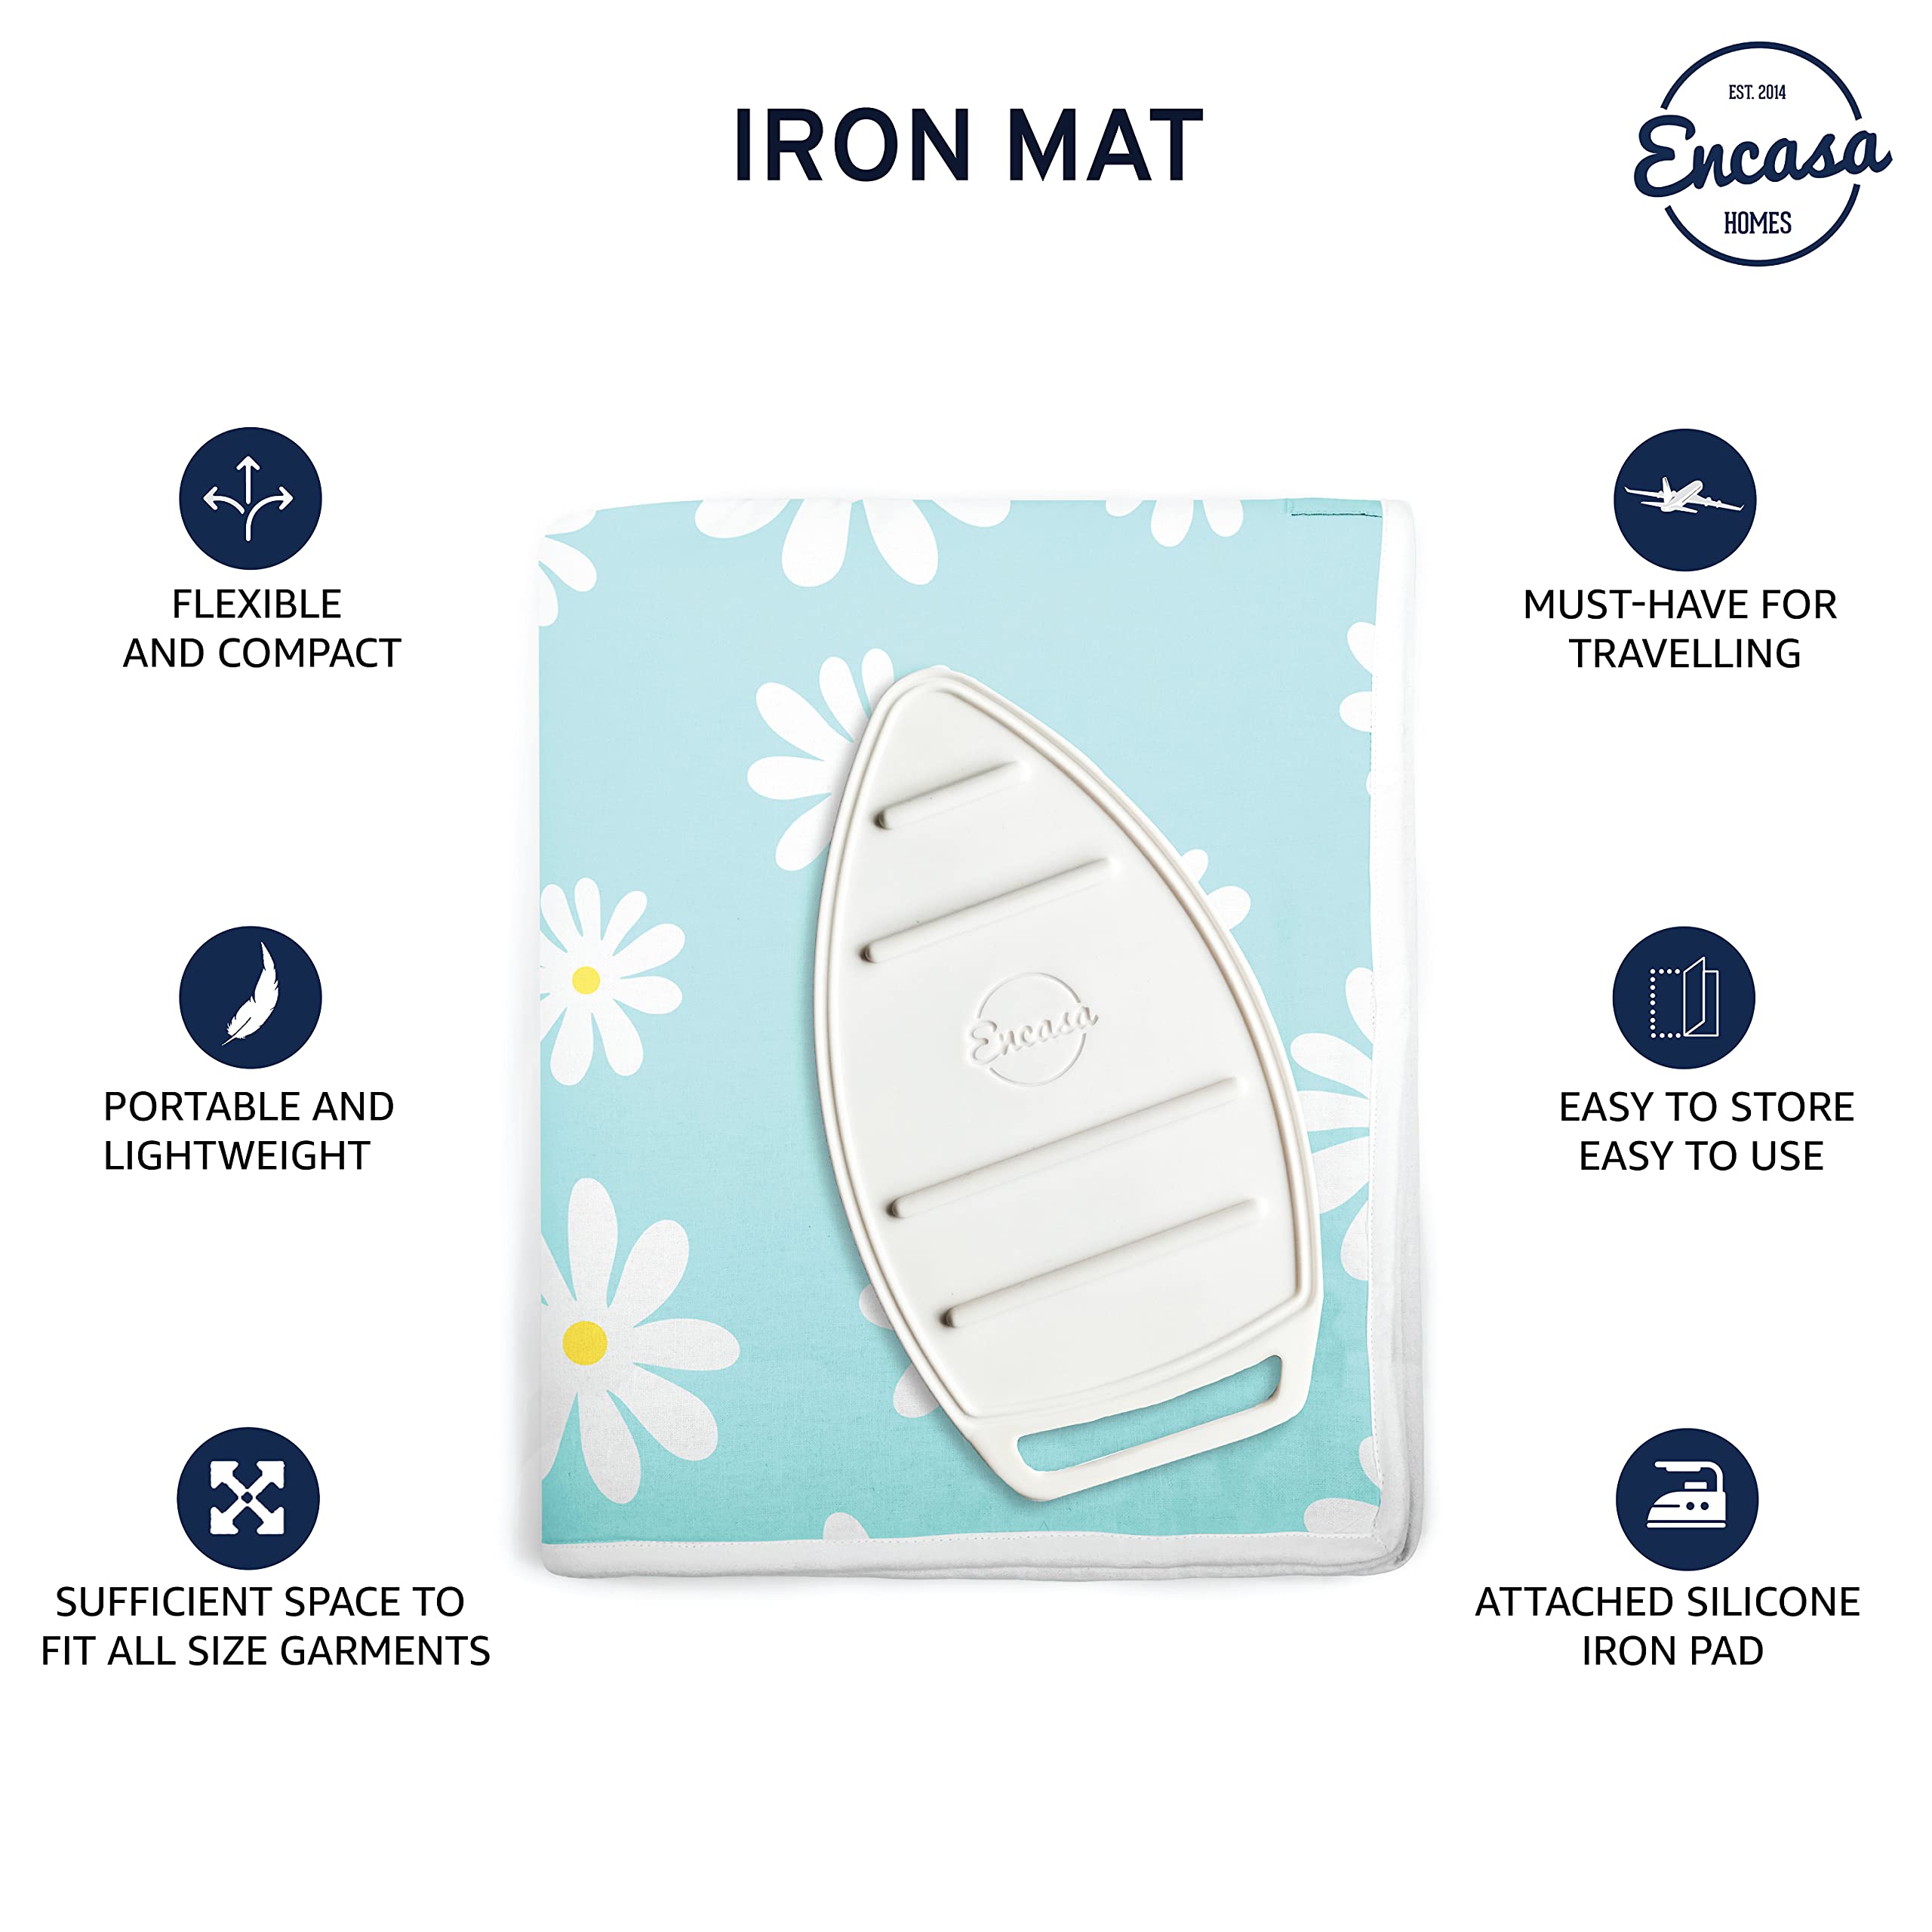 Encasa Homes Ironing Mat (Large 120 x 70 cm) with 3mm Felt Padding, Silicone Iron Rest Protector, Steam Press on Table, Bed, Portable, Heat Reflective, Foldable, Washable, Printed - Big Leaves Blue